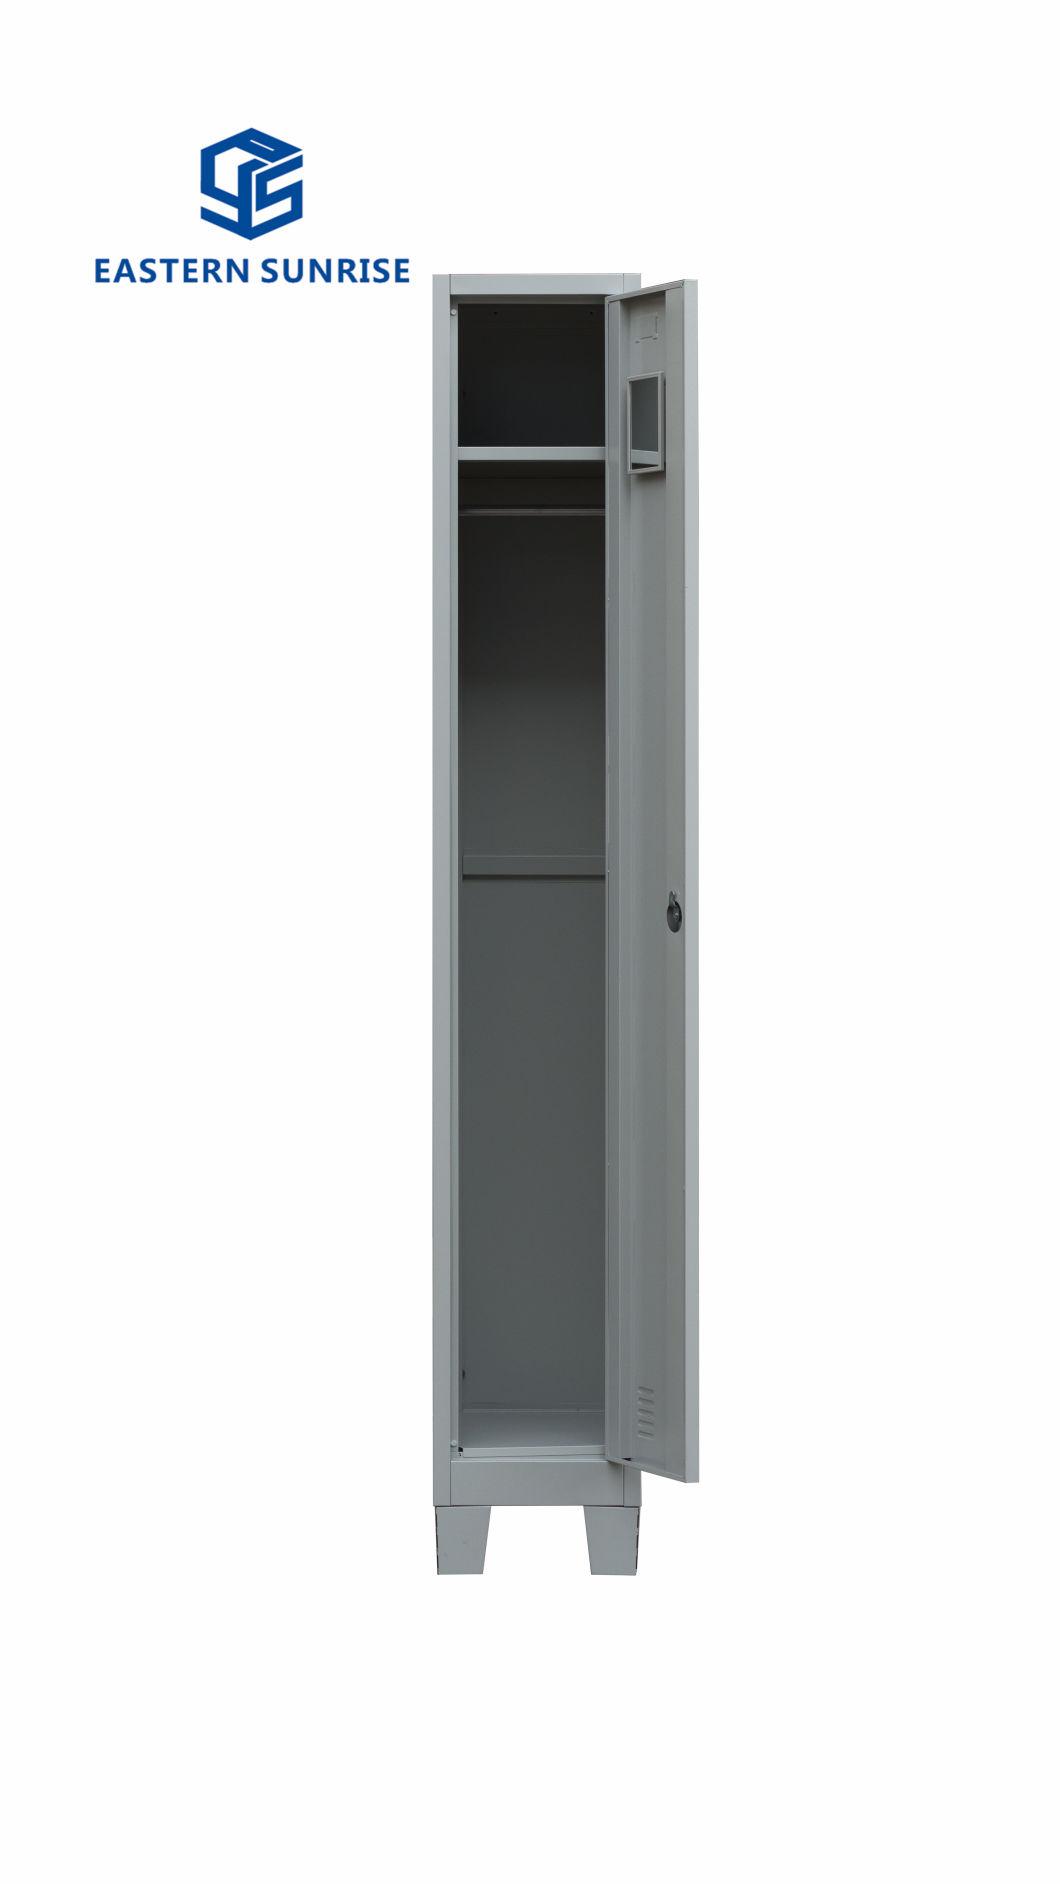 Factory Direct Single Door Locker with 4 Feet and Adjustable Shelves for Gym/Factory/Office